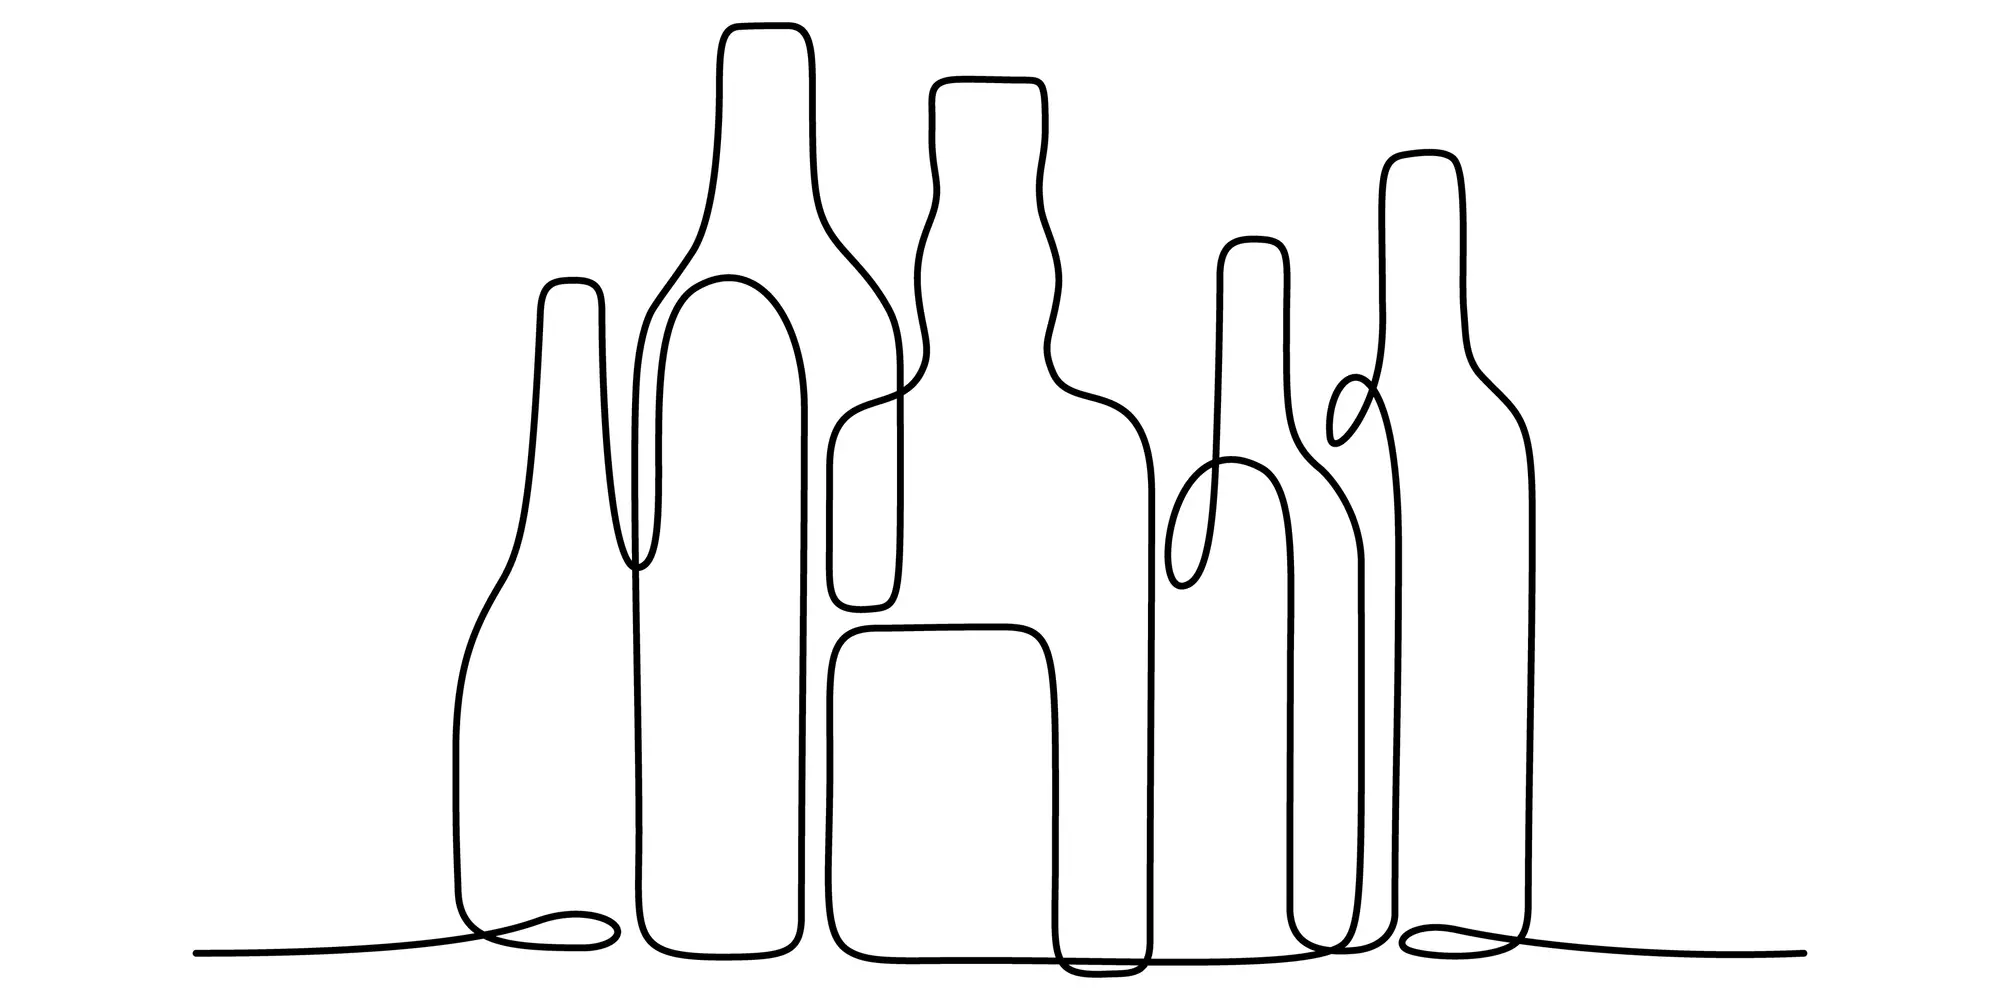 A single-line drawing of bottles.